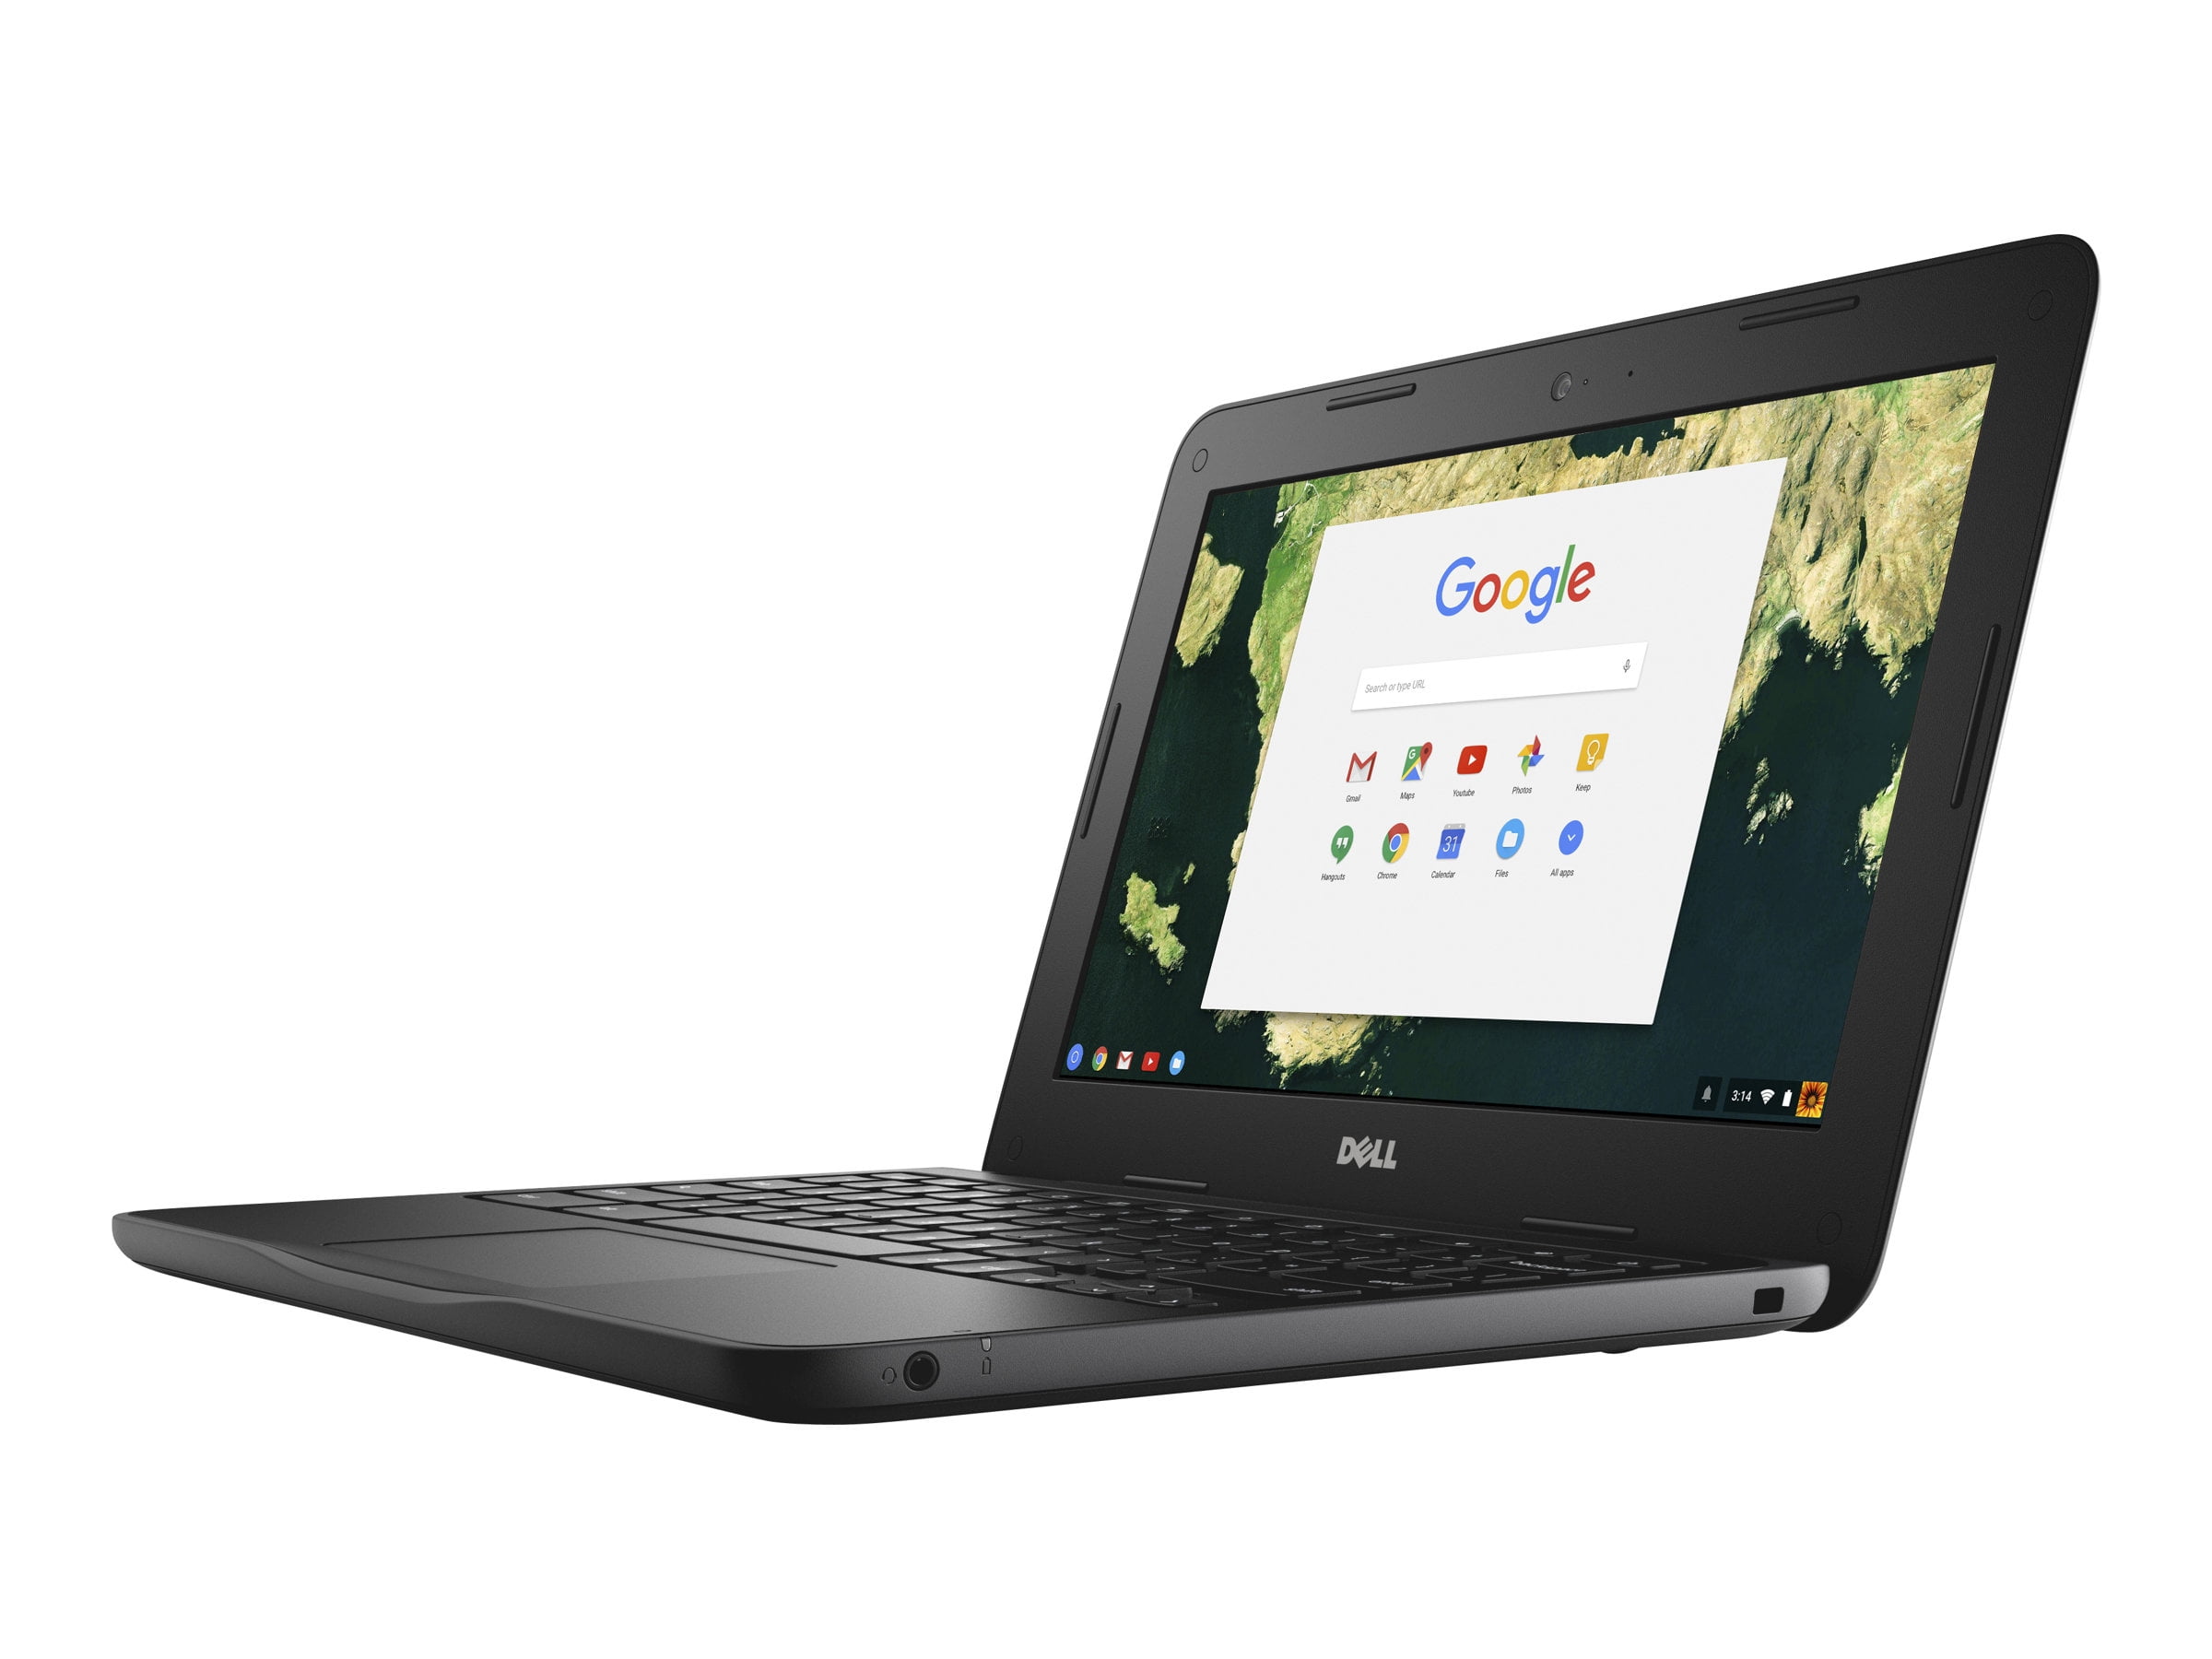 Dell Chromebook 11 3180 Celeron N3060 1 6 Ghz Chrome Os 4 Gb Ram 16 Gb Emmc 11 6 1366 X 768 Hd Hd Graphics 400 Wi Fi Black Bts With 1 Year Dell Mail In Service Walmart Com Walmart Com - how to get roblox on chromebook 2018